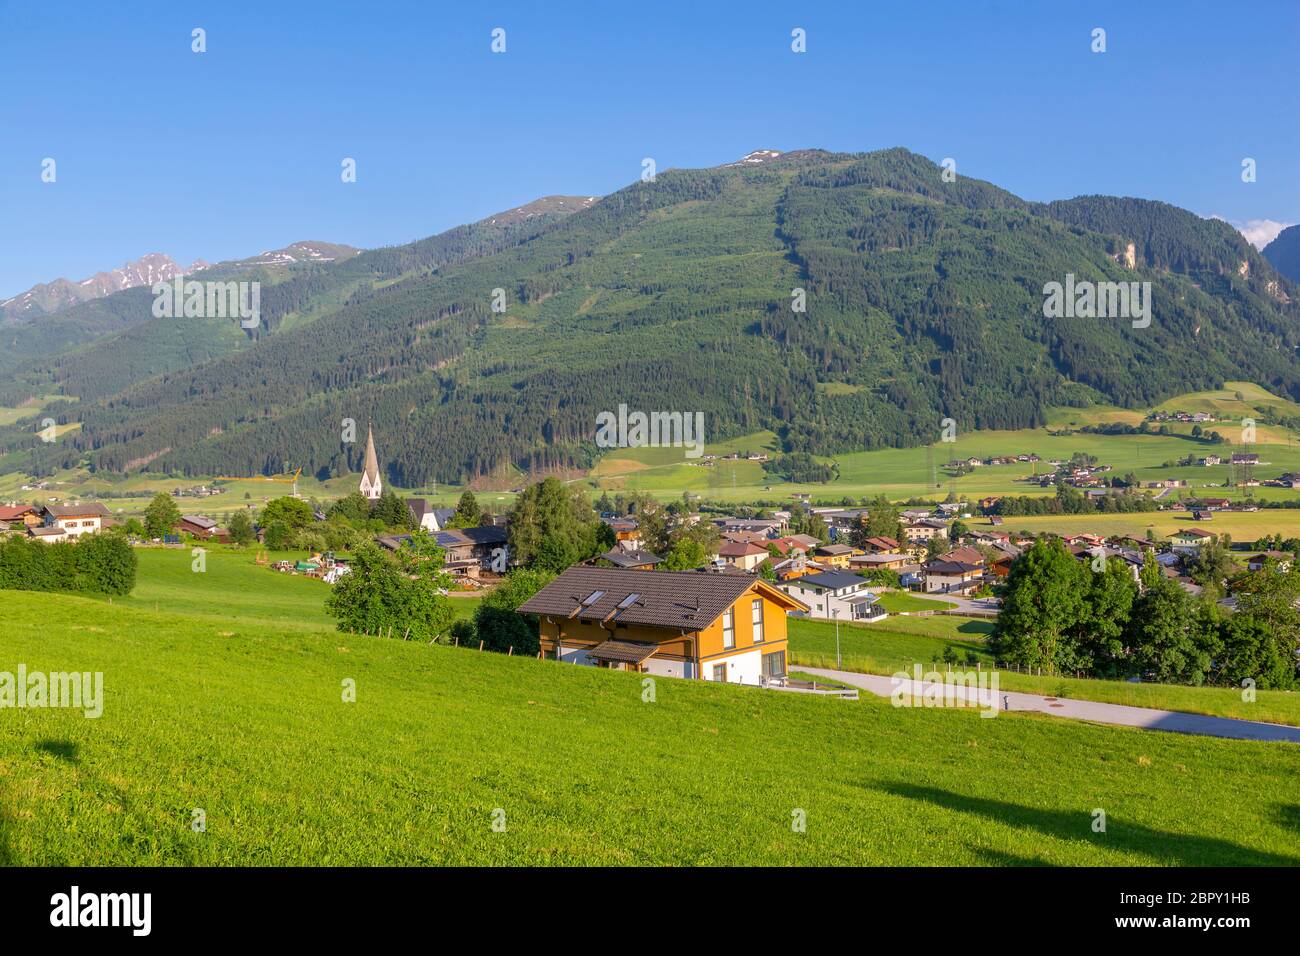 Elevated view of mountains and village near Mittersill, Pinzgau region of the Alps, Salzburg, Austria, Europe Stock Photo